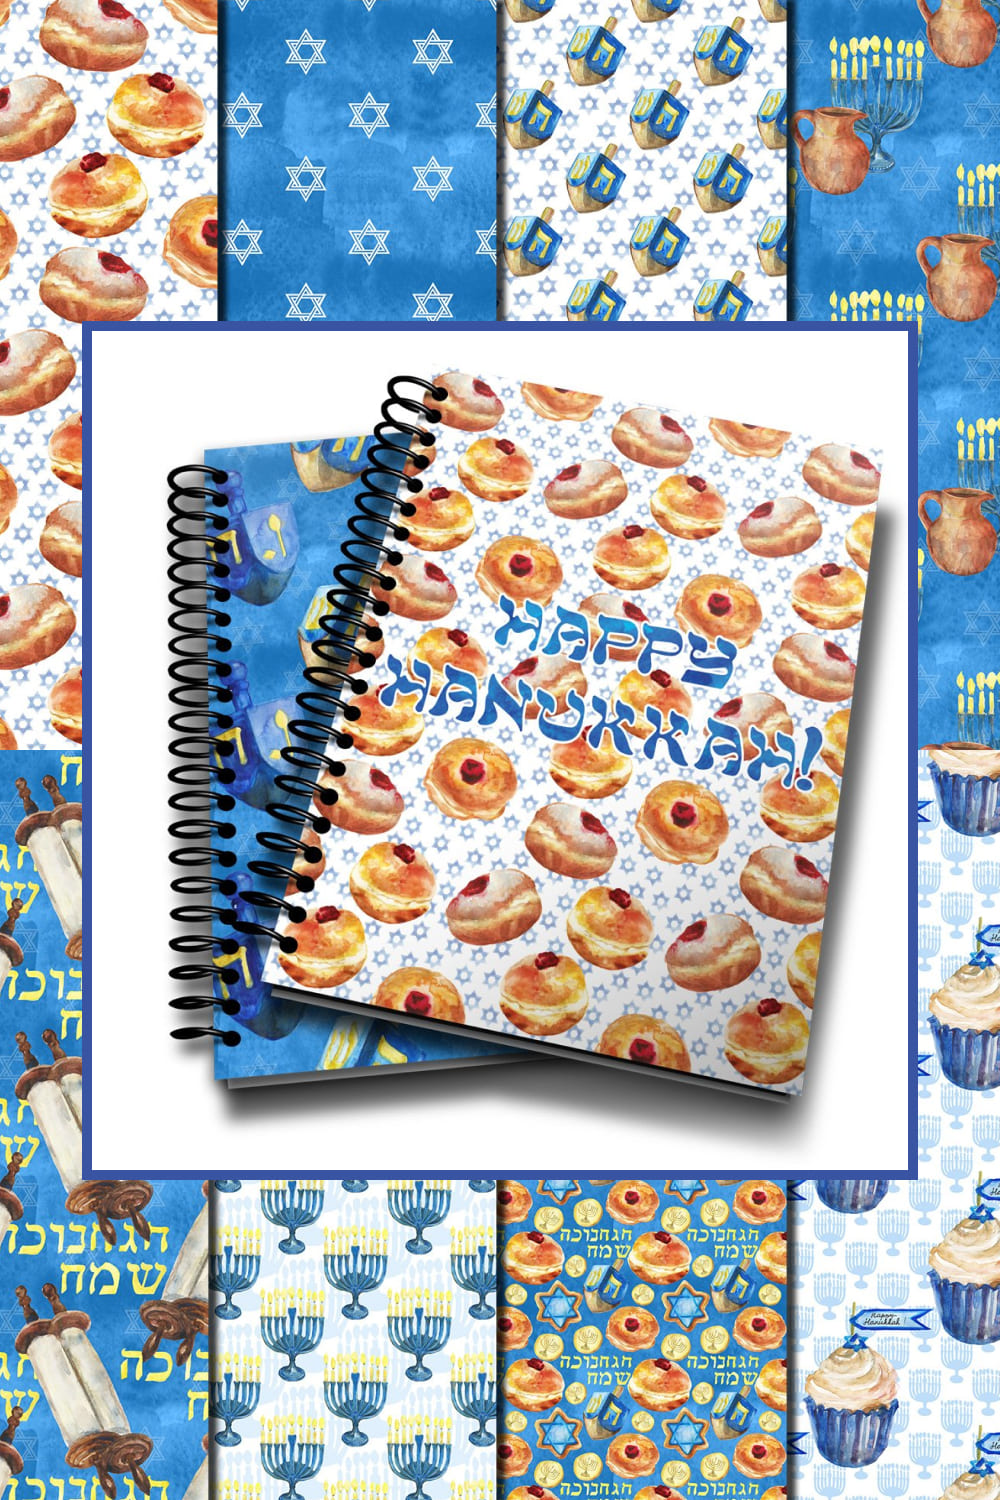 Edible textures and more for Hanukkah.